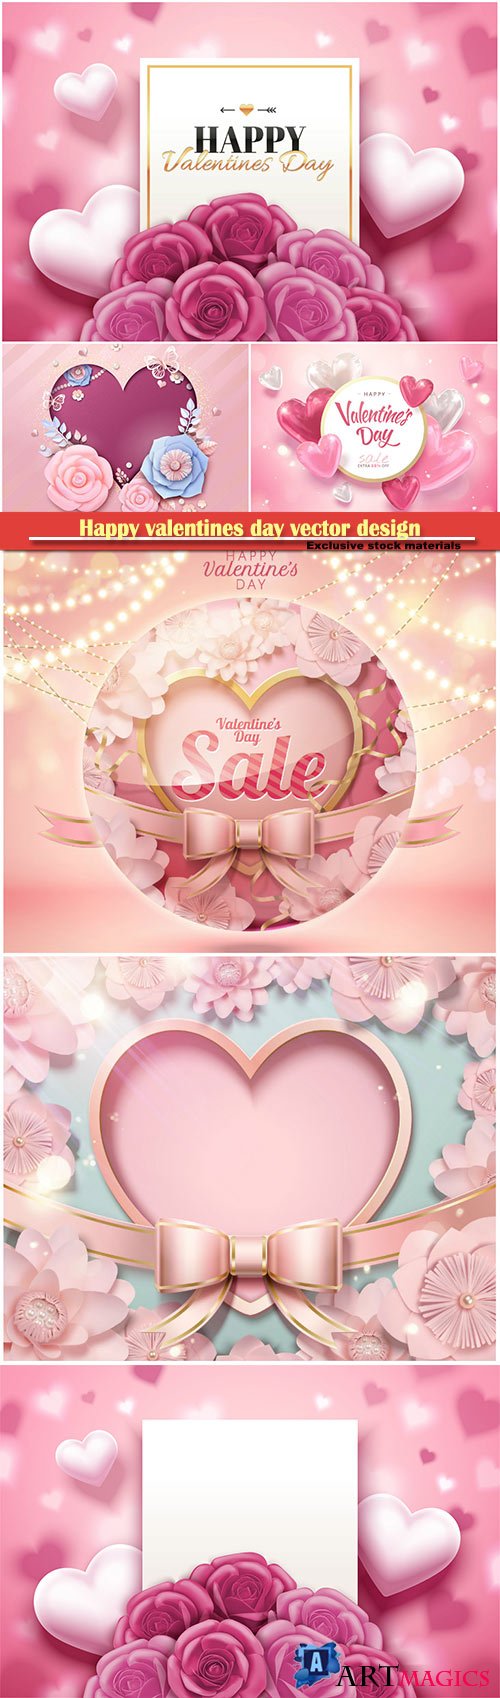 Happy valentines day vector design with heart, balloons, roses in 3d illustration # 9